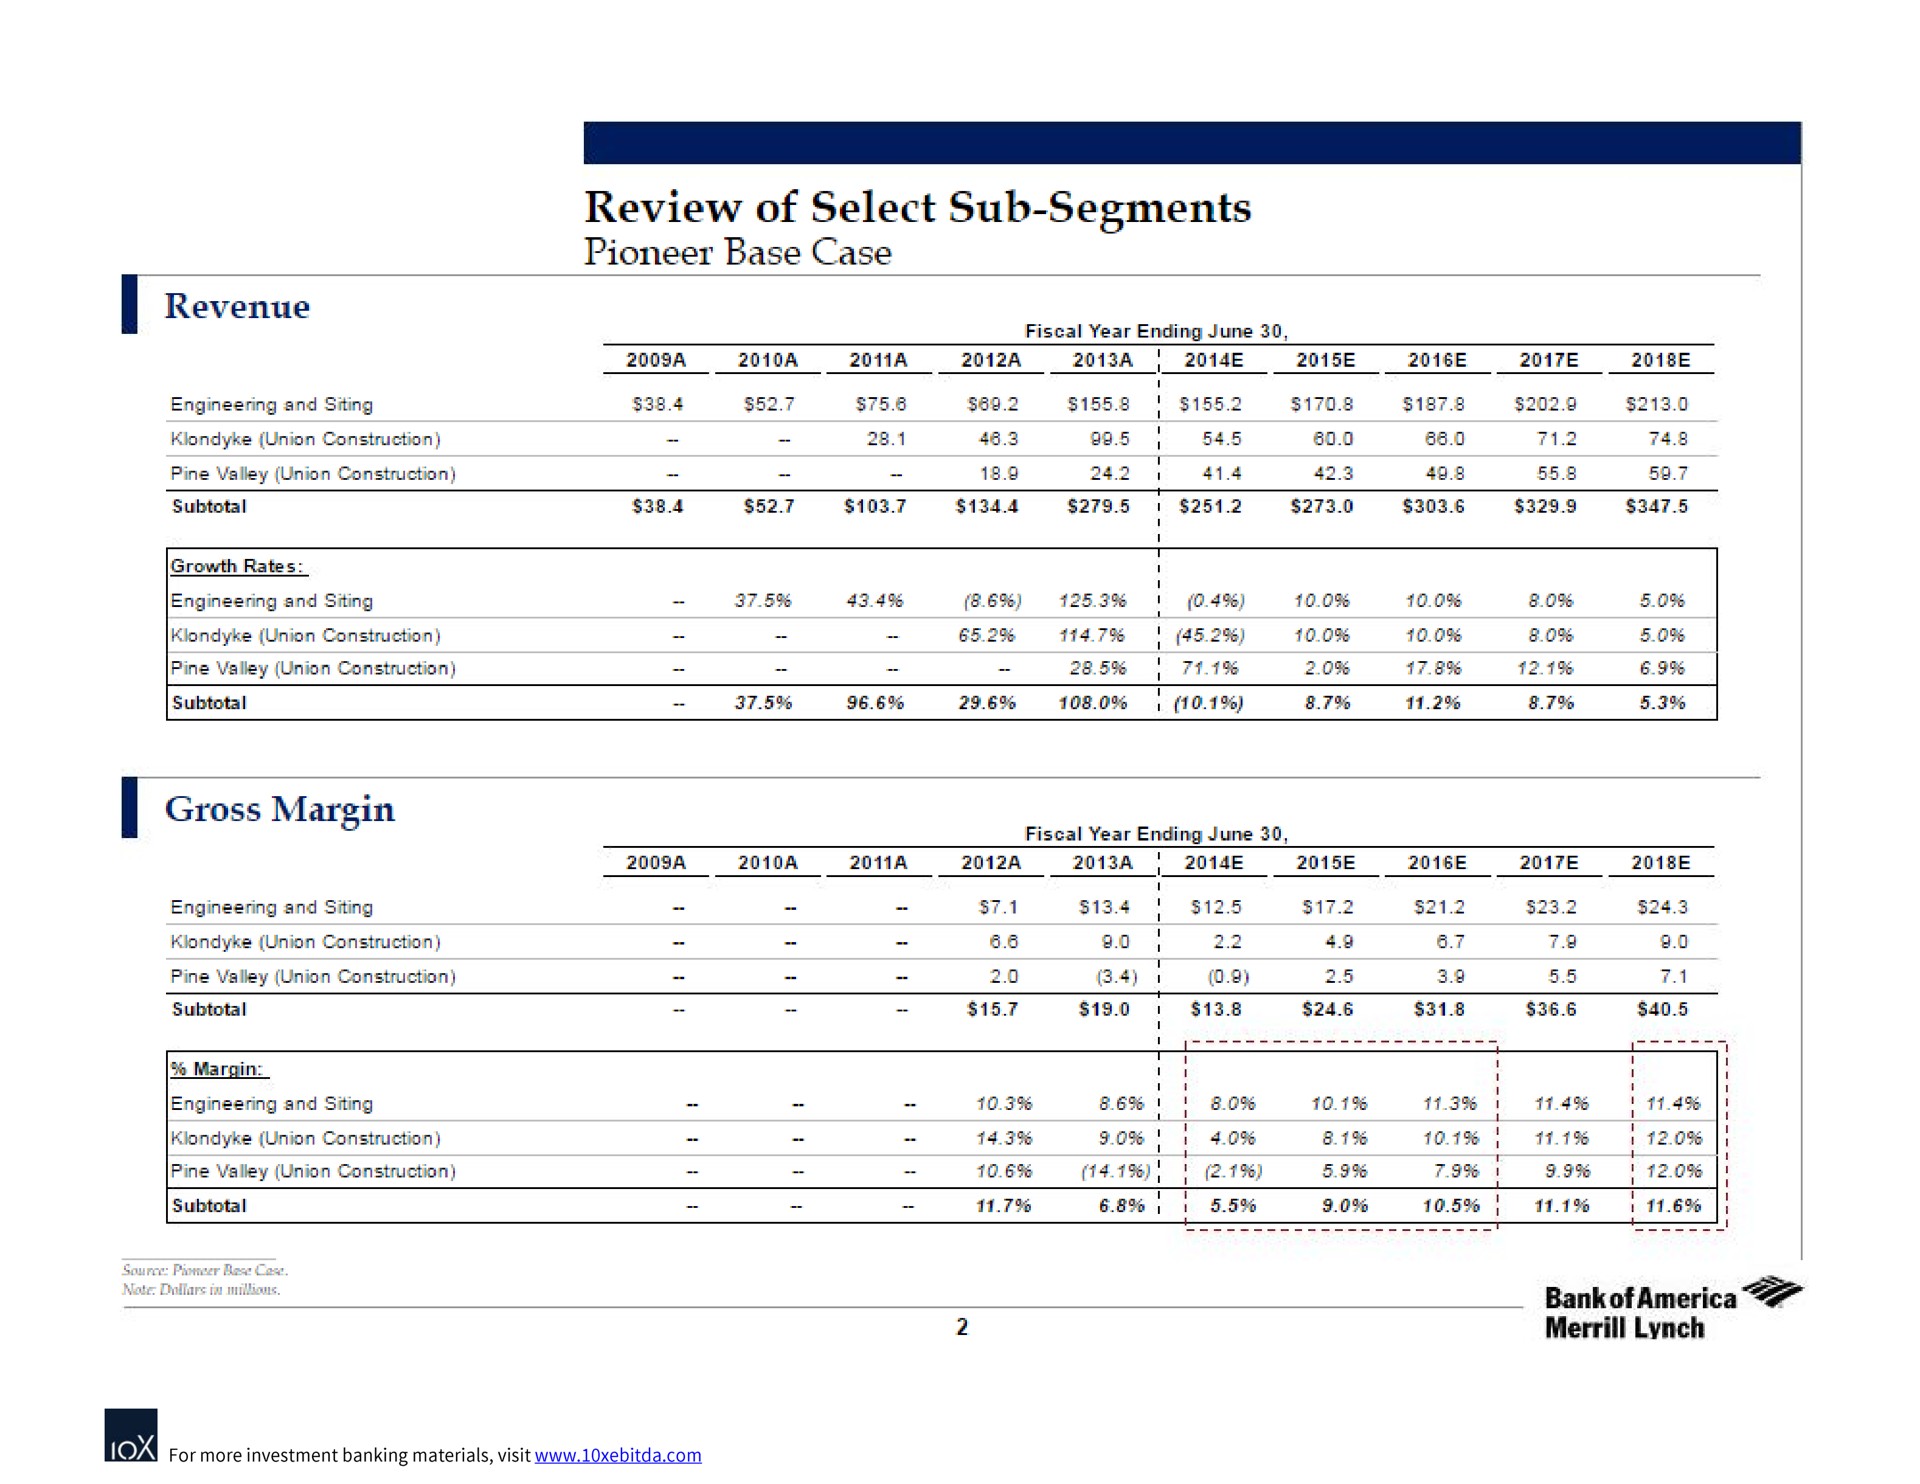 review of select sub segments pioneer base case revenue gross margin daler lynch | Bank of America